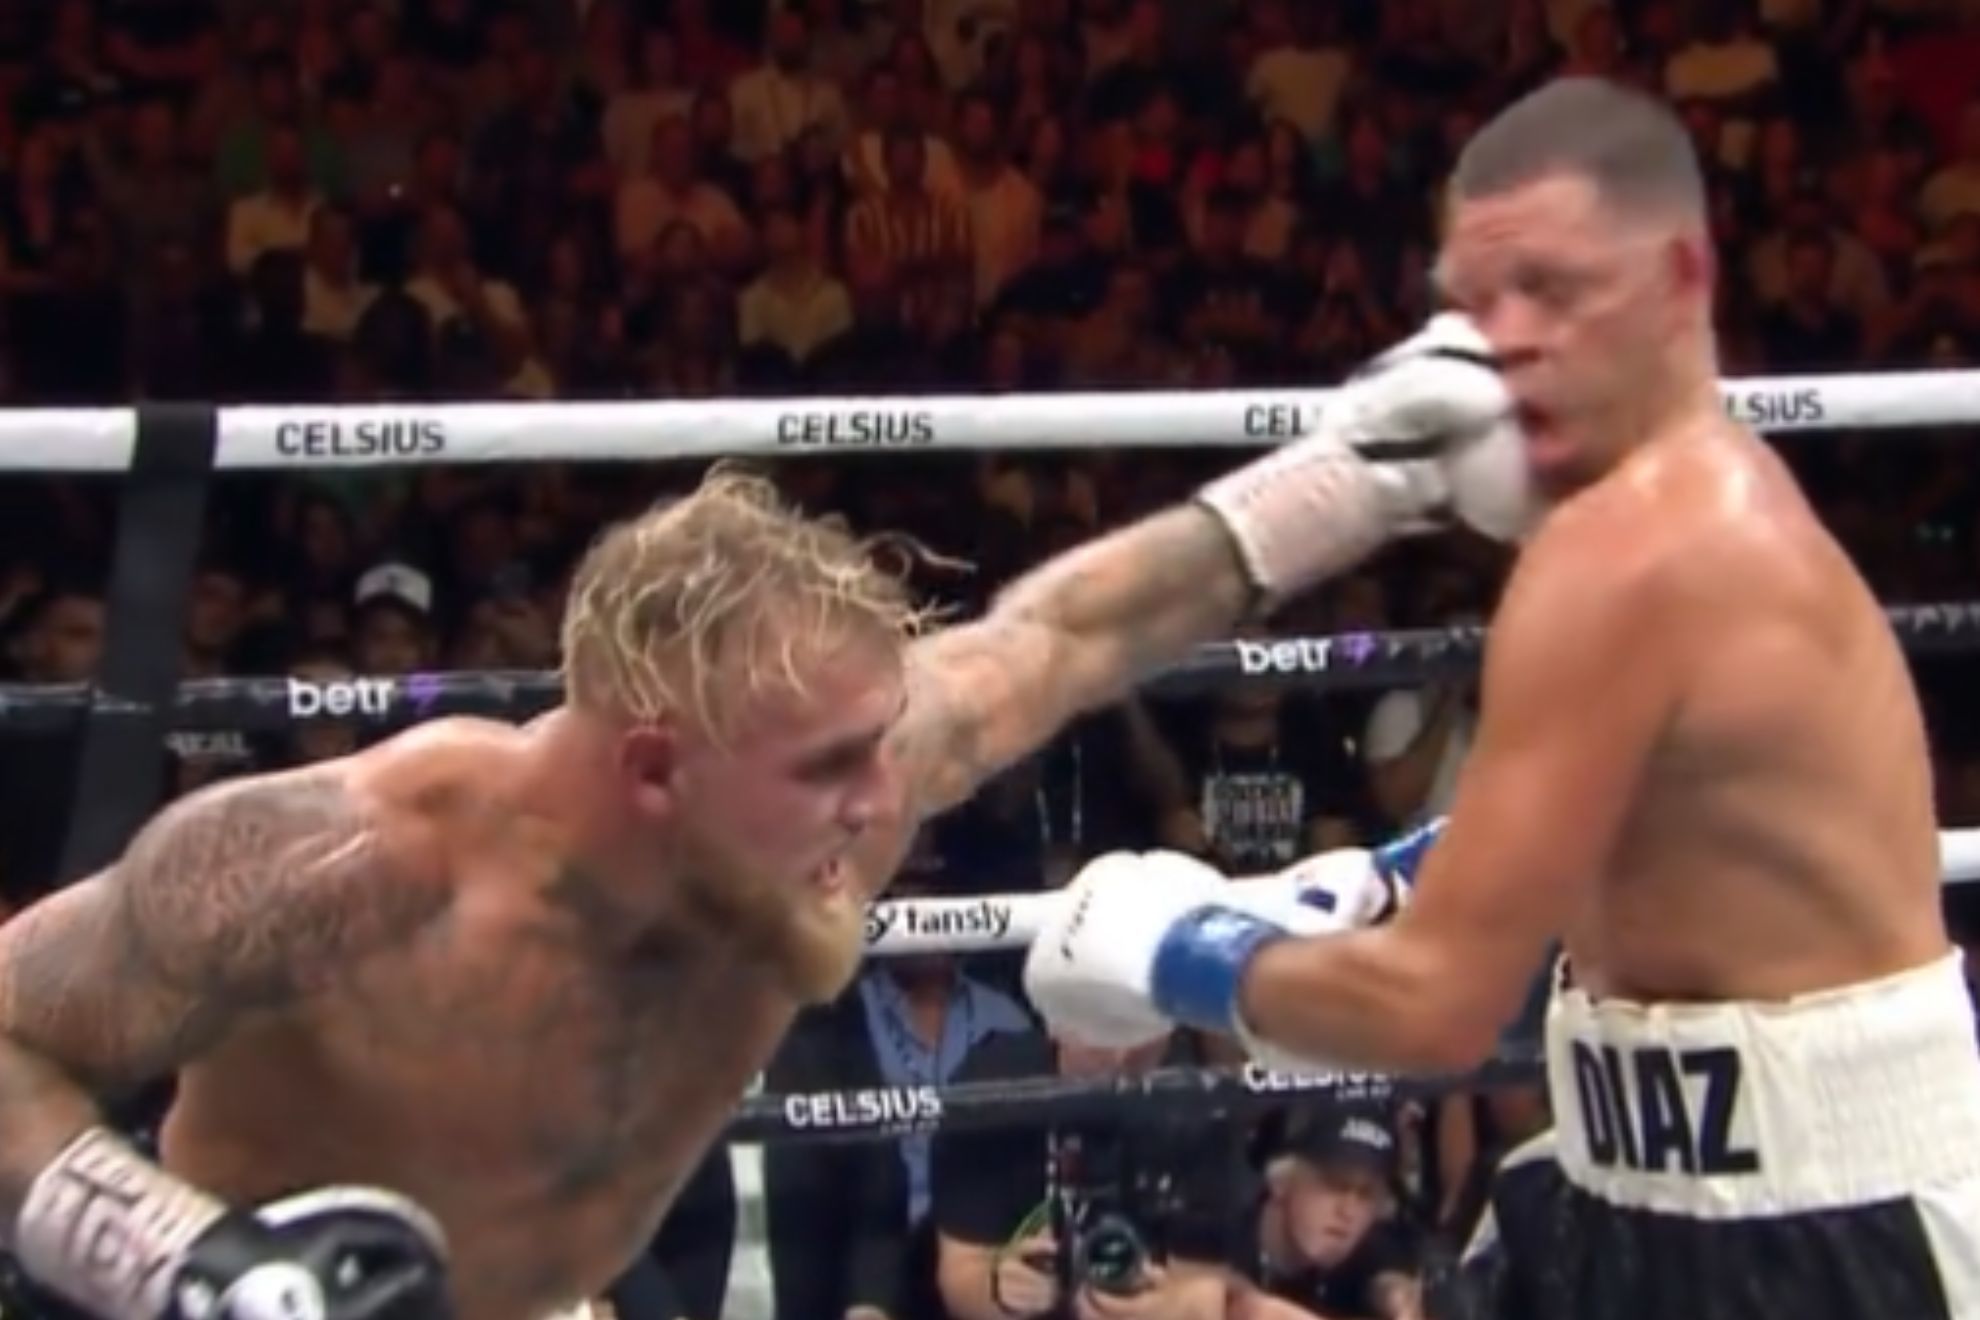 Jake Paul defeats Nate Diaz in boxing, both fighters want rematch in MMA